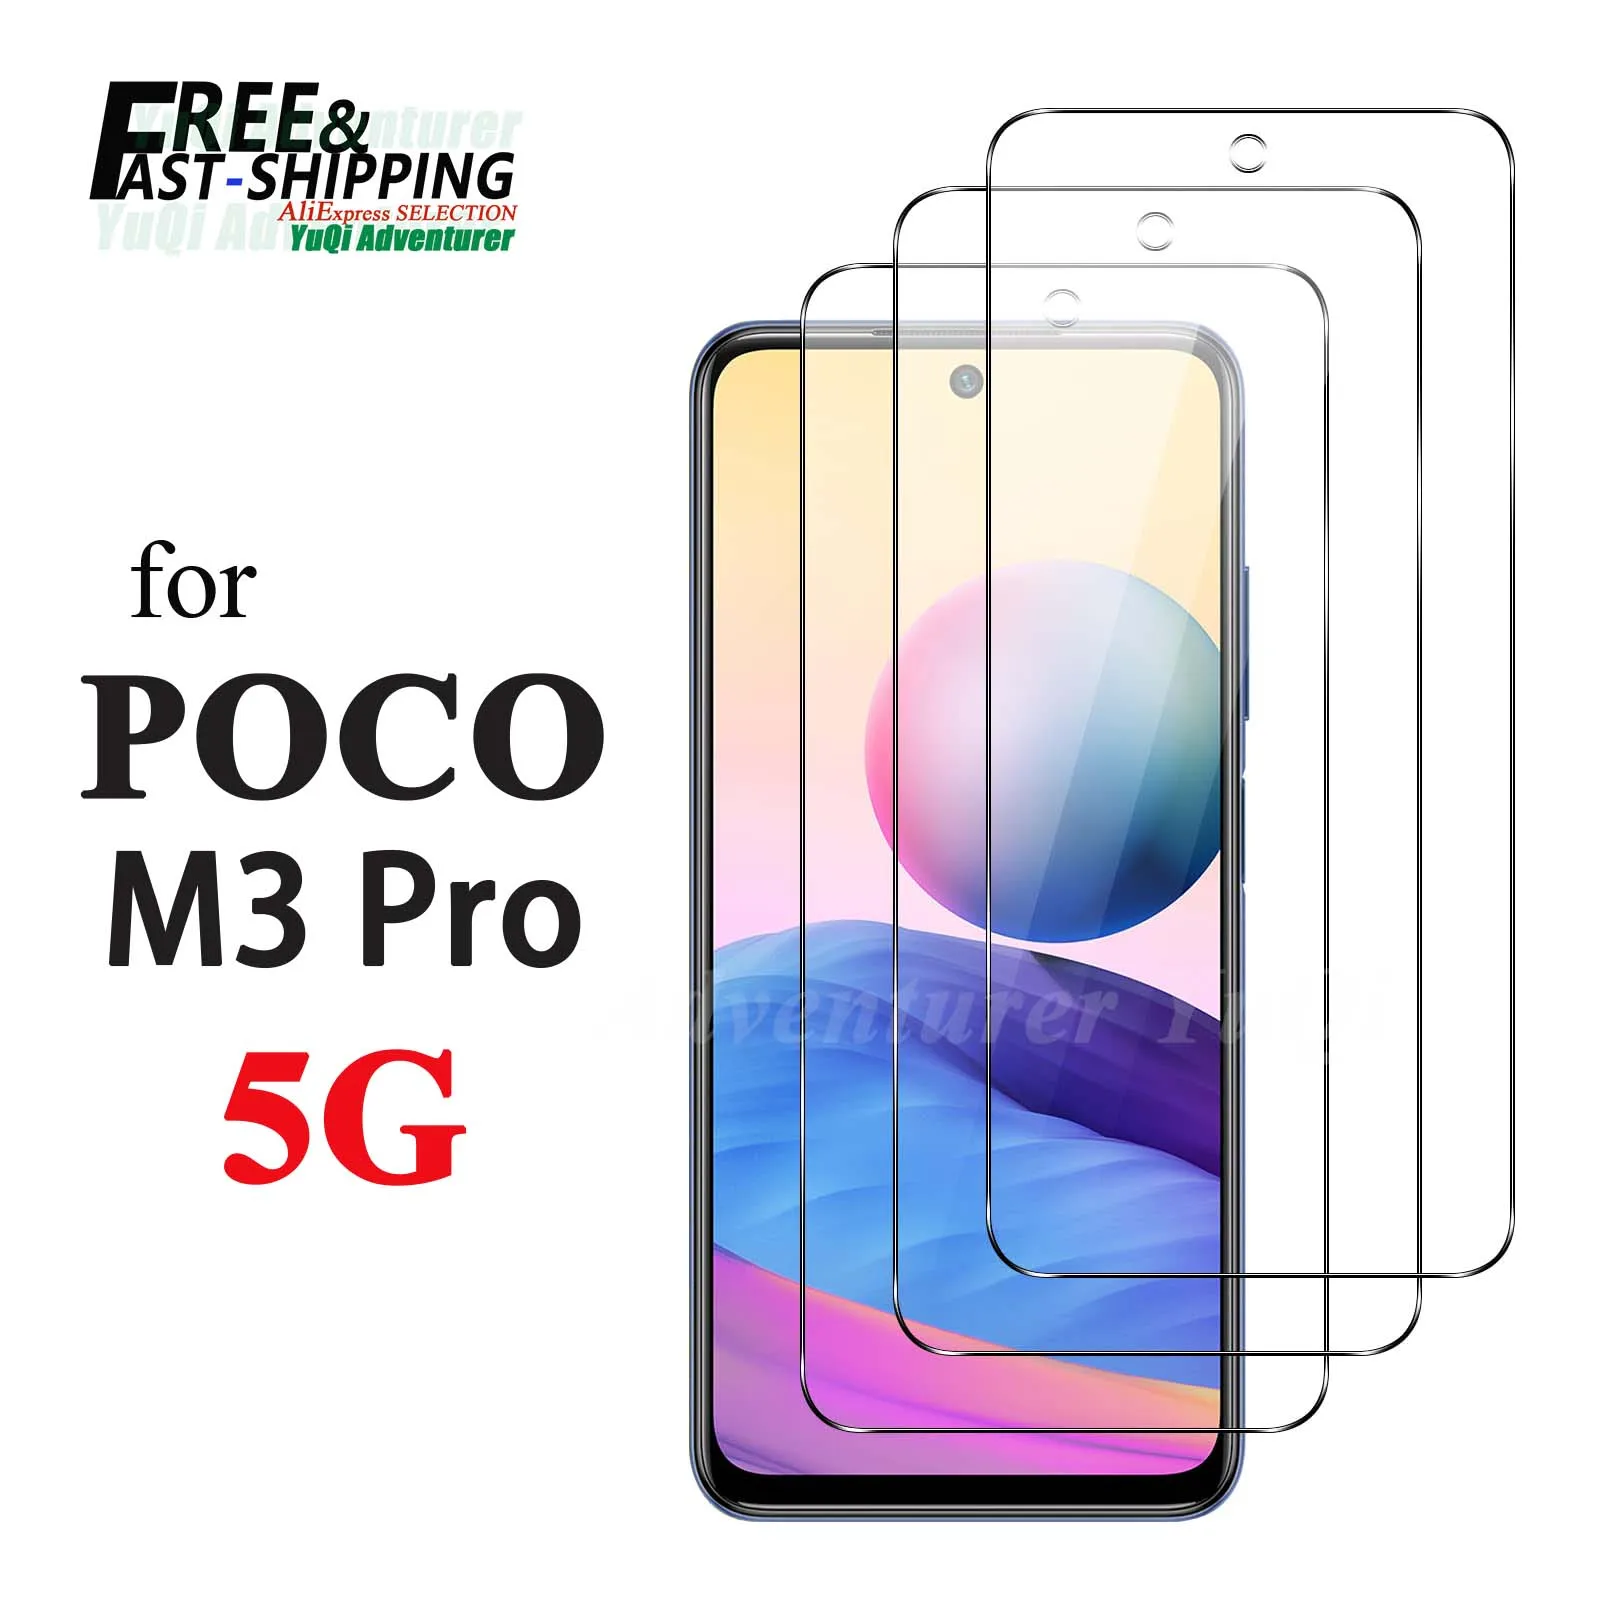 

Screen Protector For POCO M3 Pro 5G Xiaomi, Tempered Glass HD 9H Hight Aluminum Anti Scratch Case Friendly Free Shipping